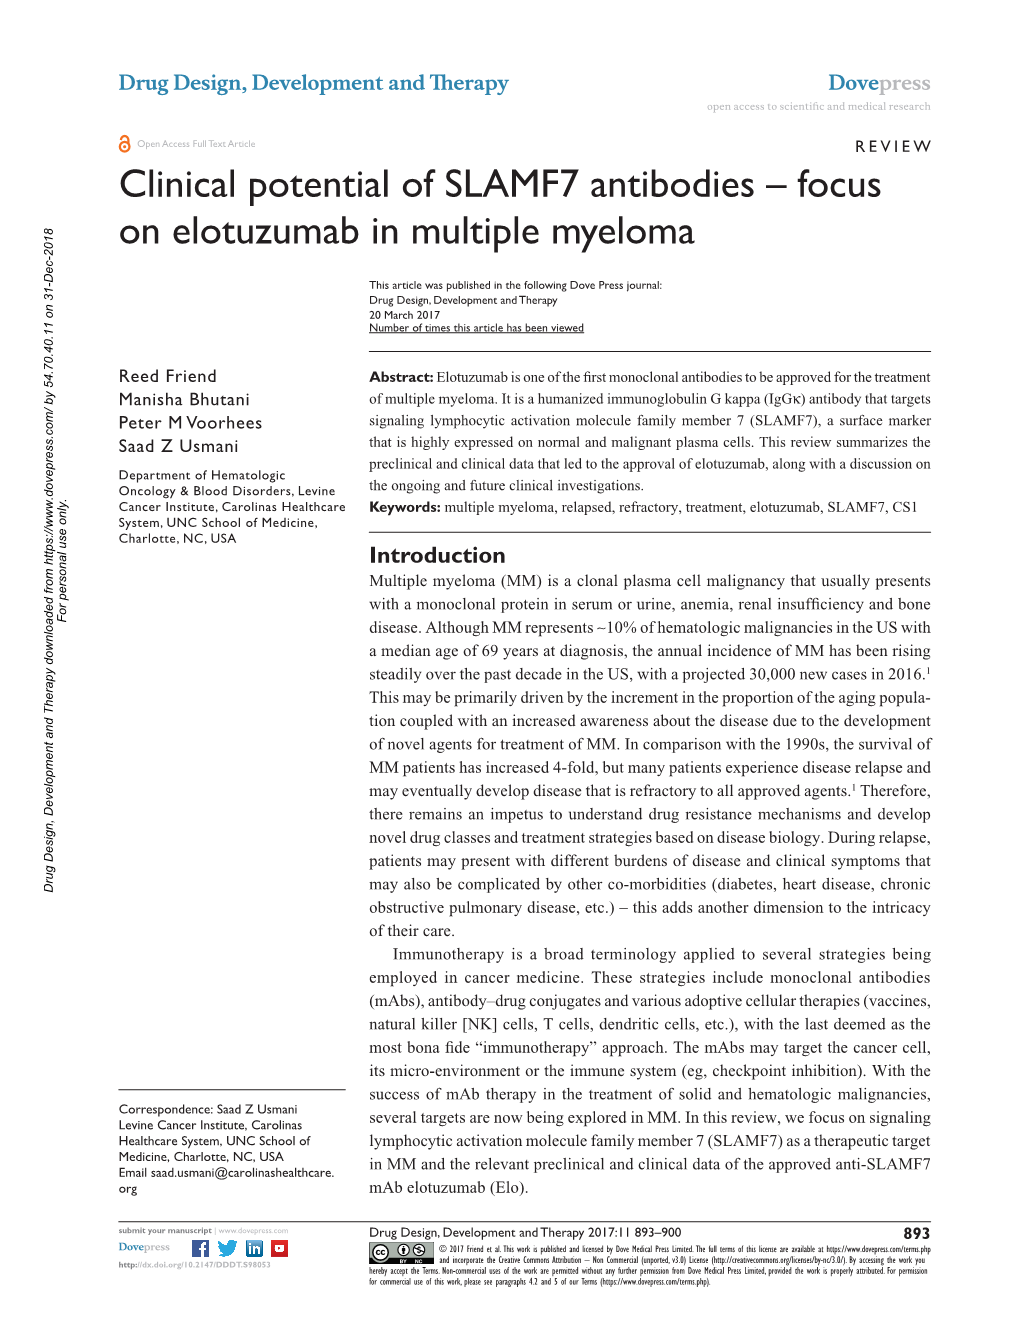 Clinical Potential of SLAMF7 Antibodies – Focus on Elotuzumab in Multiple Myeloma